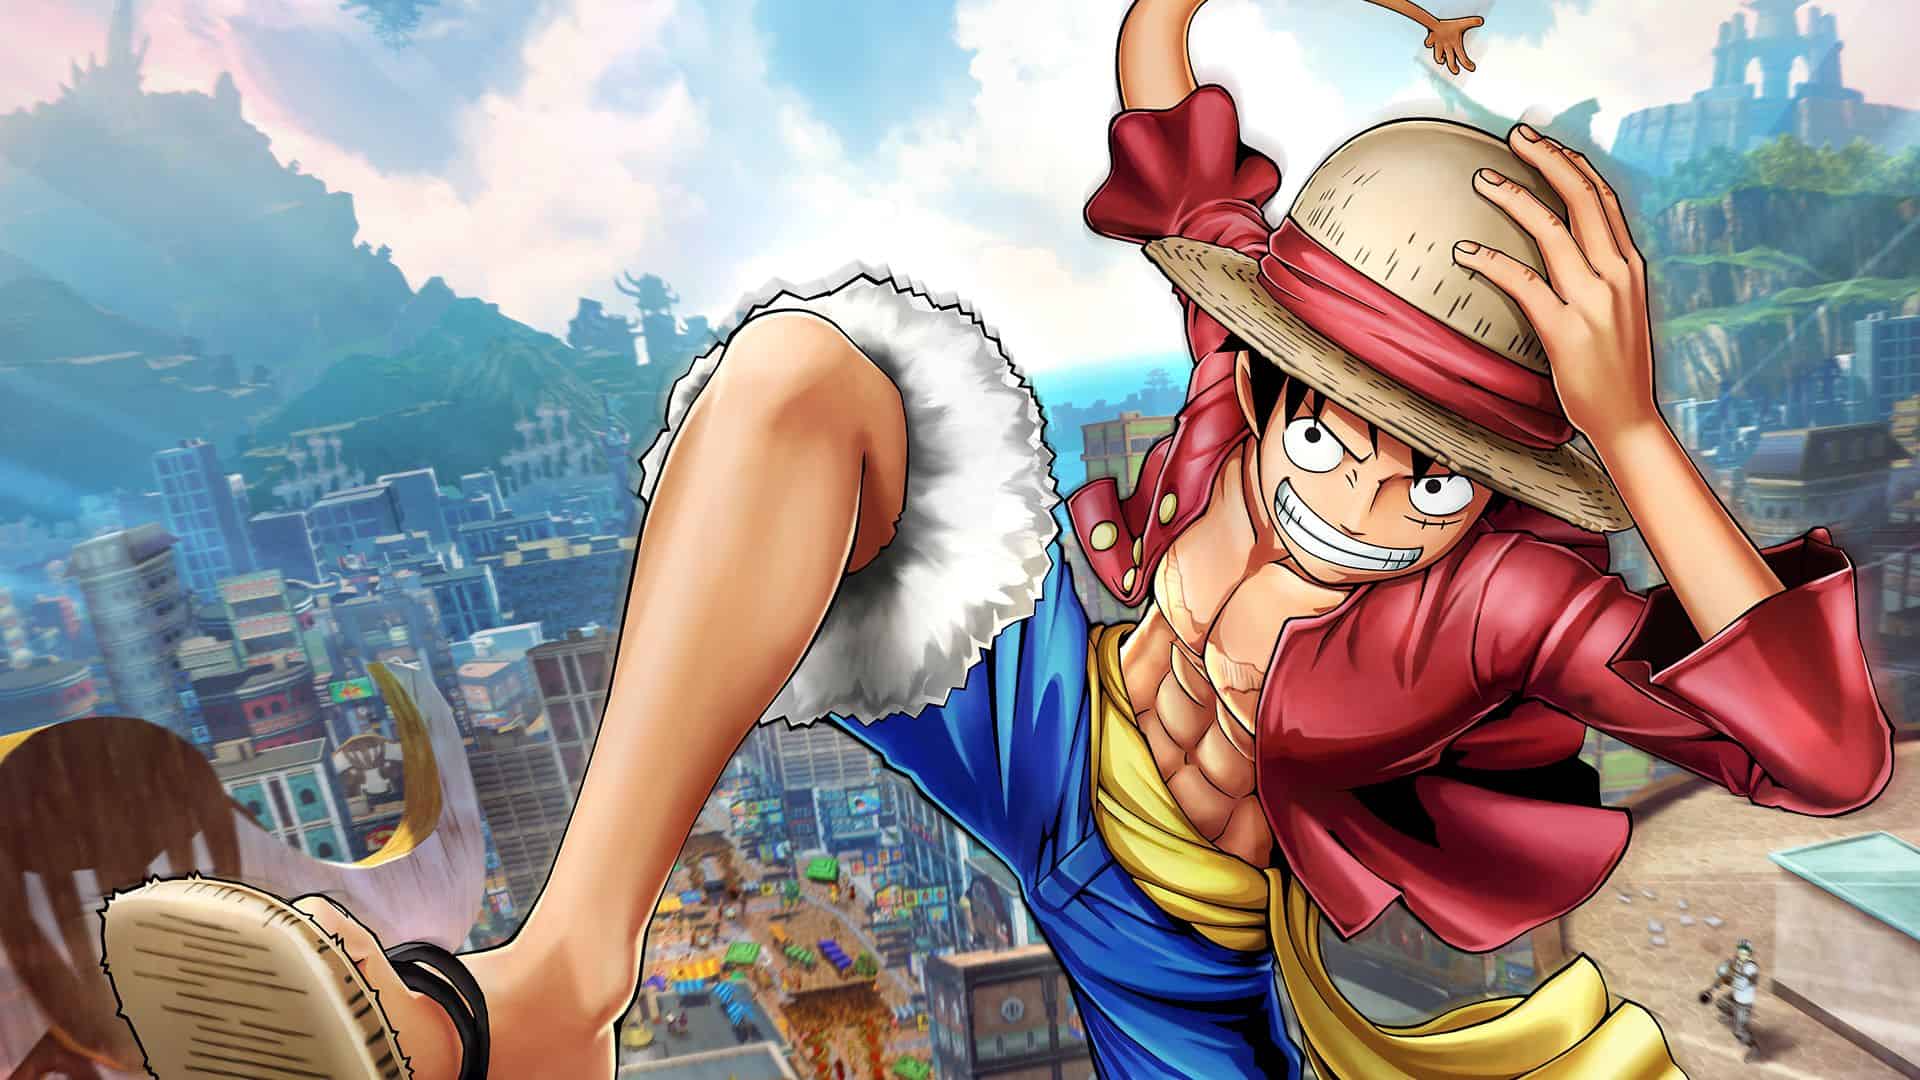 Ps4 One Piece Anime Wallpapers Wallpaper Cave